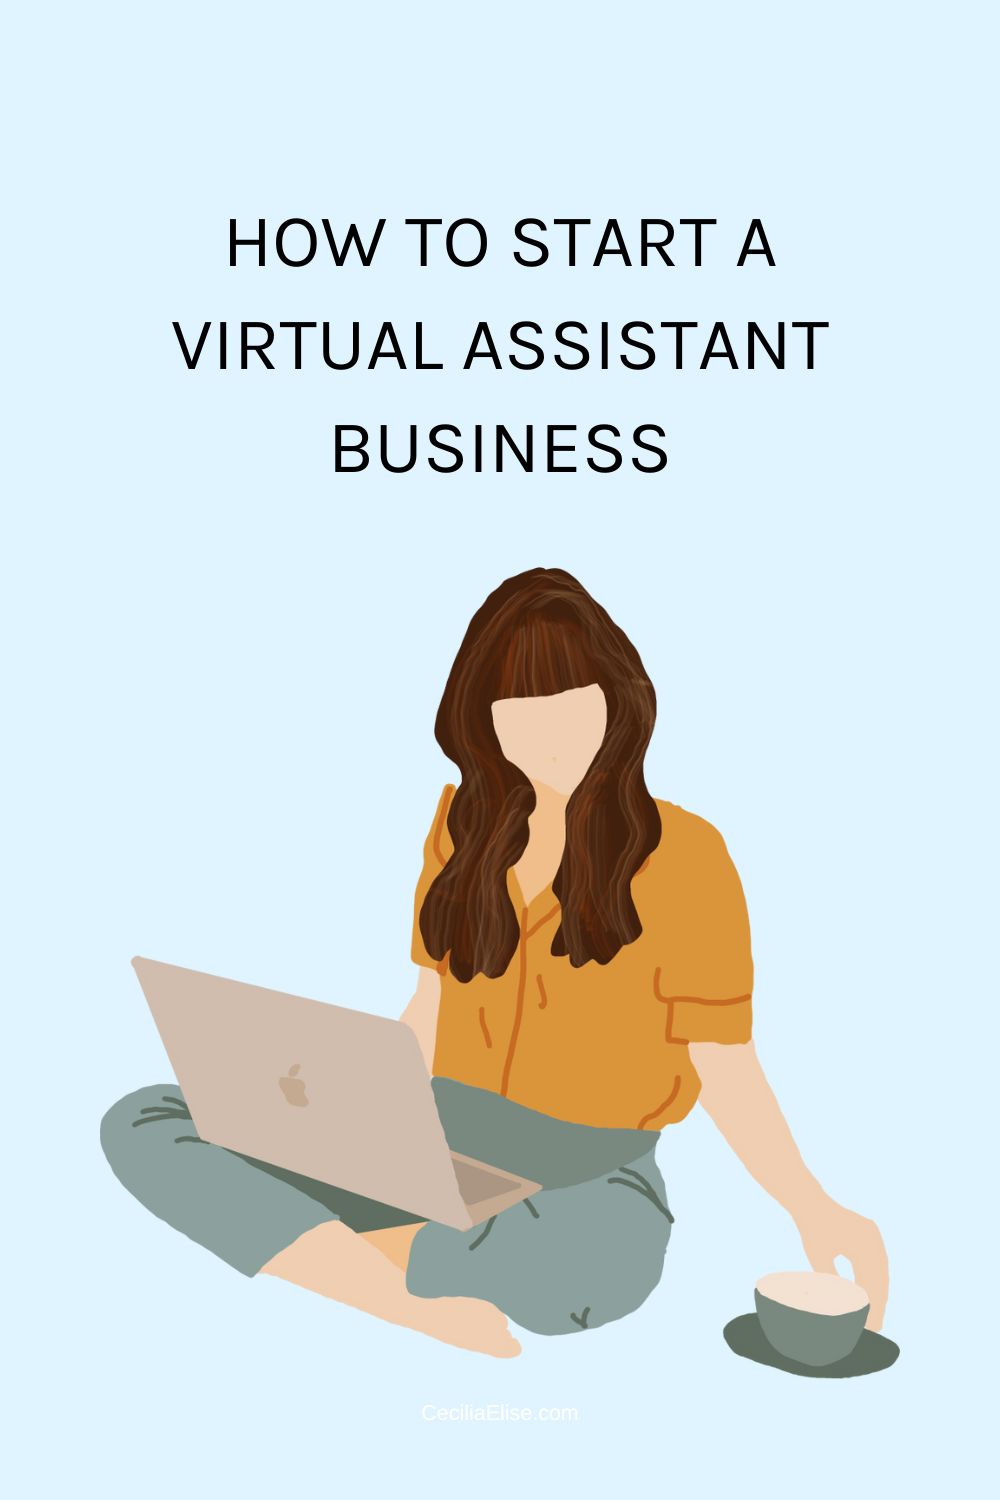 How to Start a Virtual Assistant Business